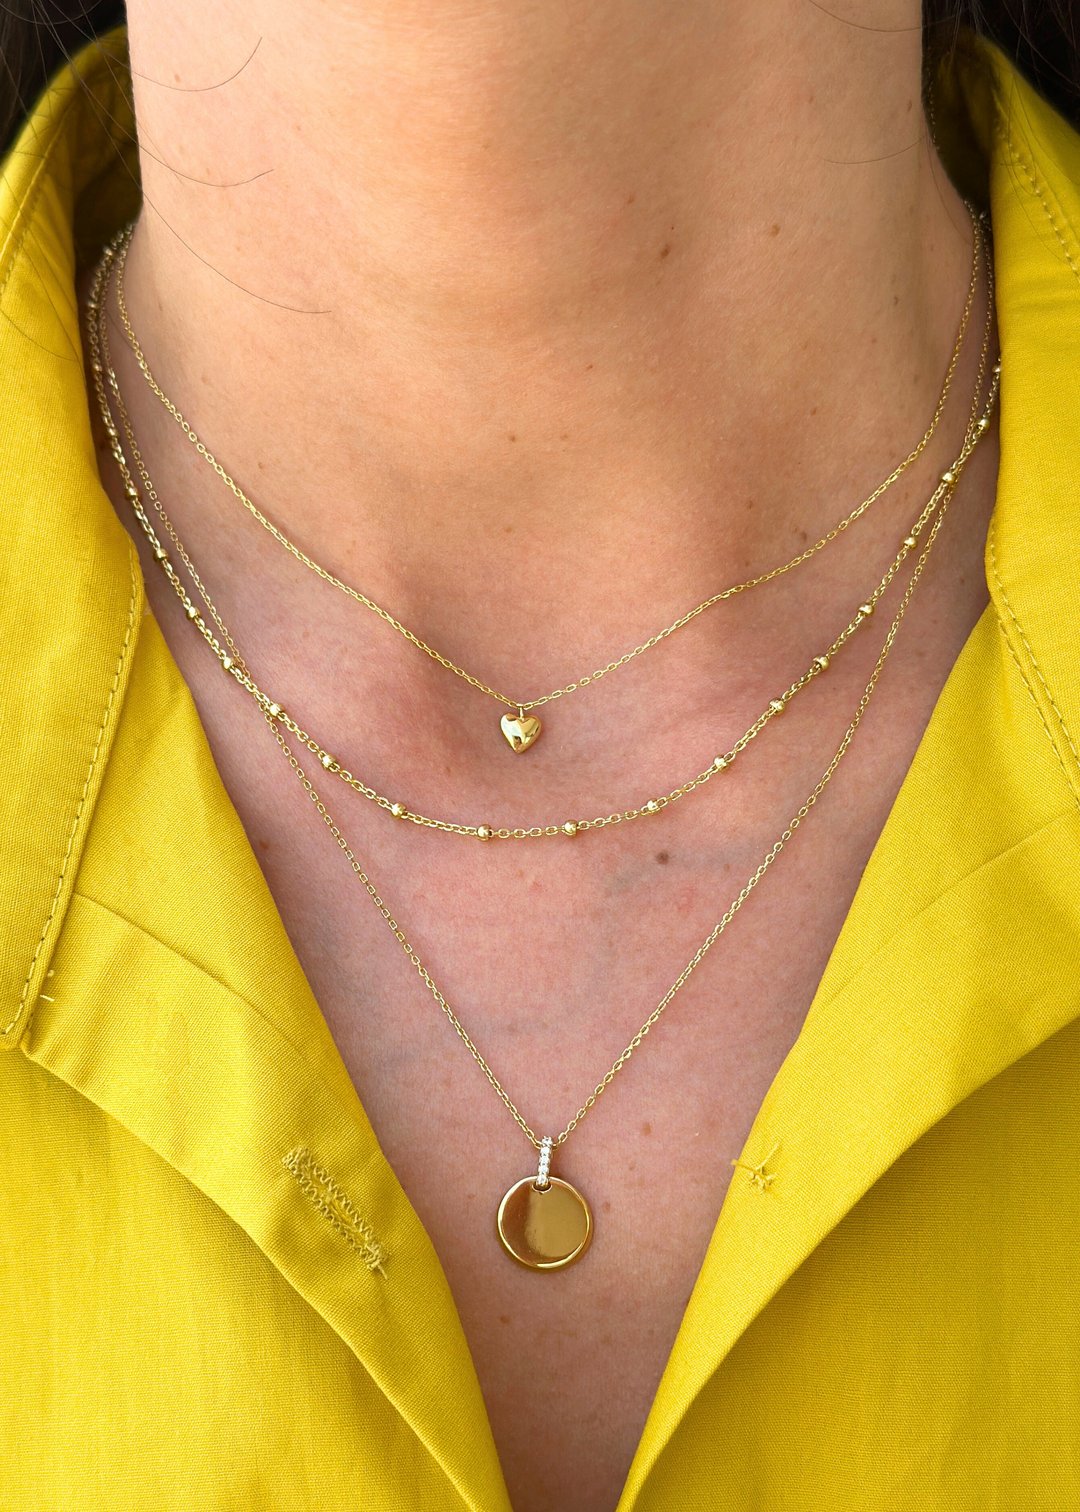 Accented Disc Necklace